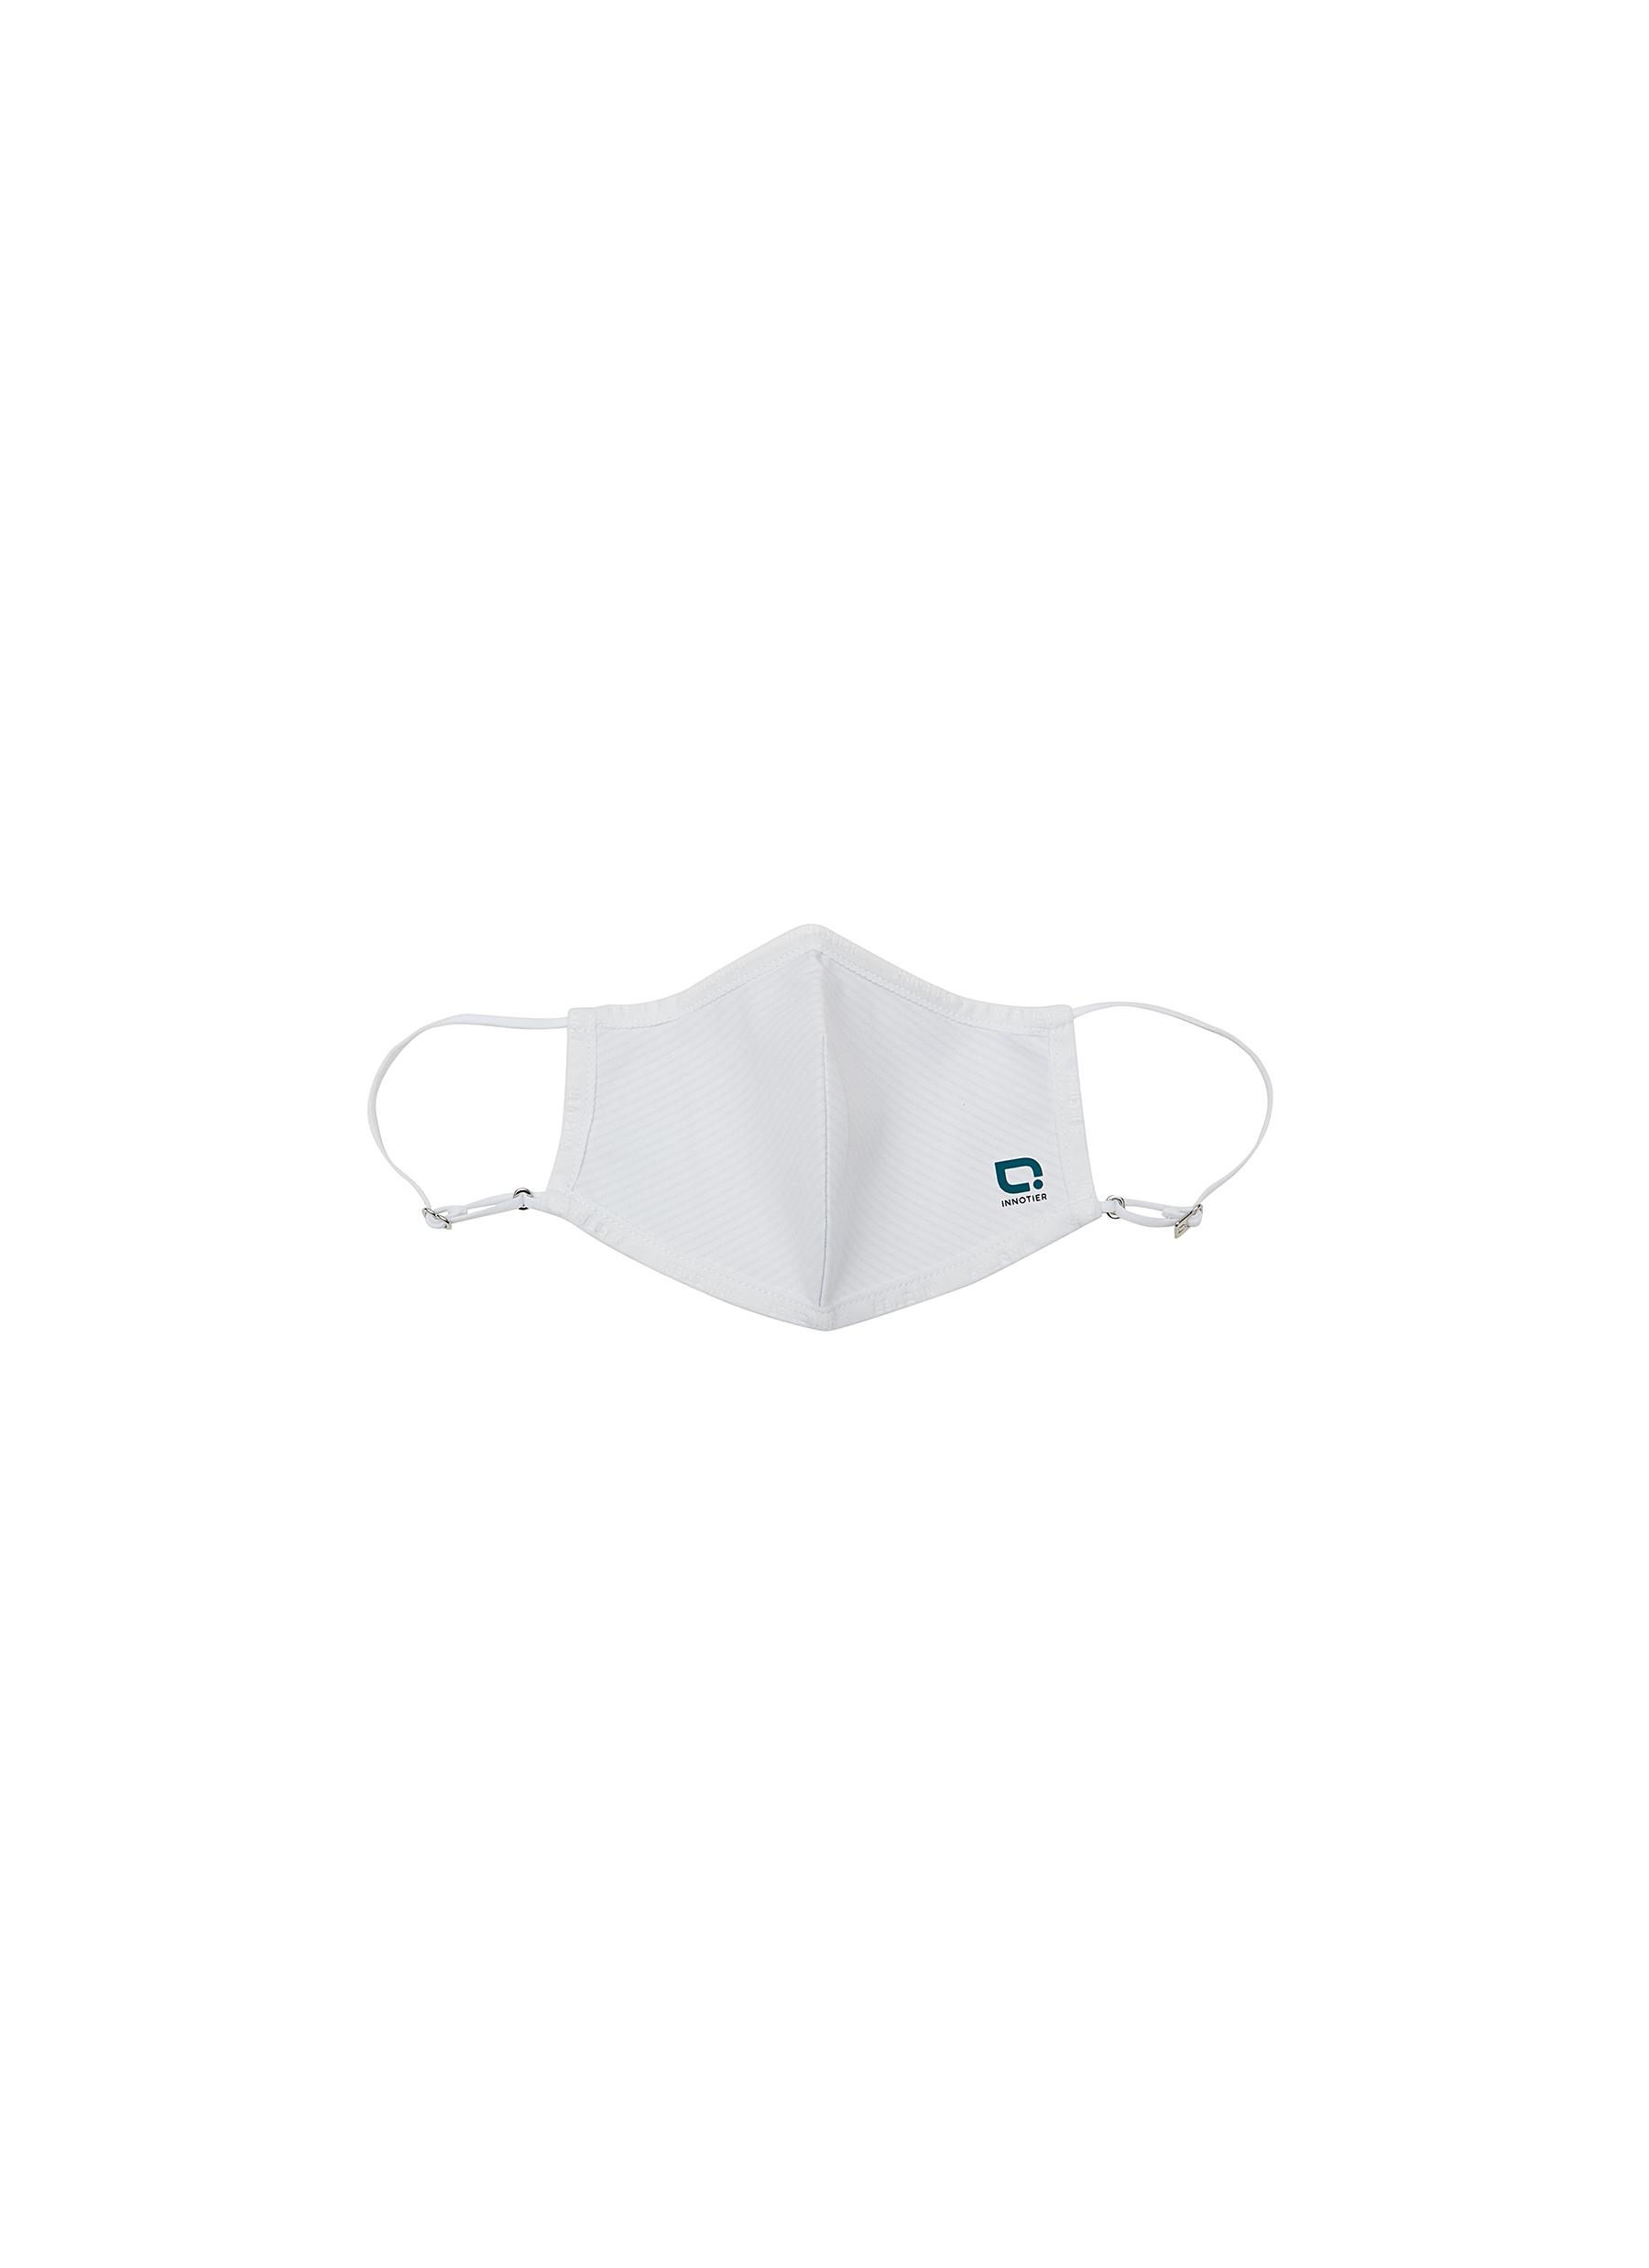 INNOTIER InnoShield Champion Series SXM99 Adult Extra Reusable Face Mask - Off-White